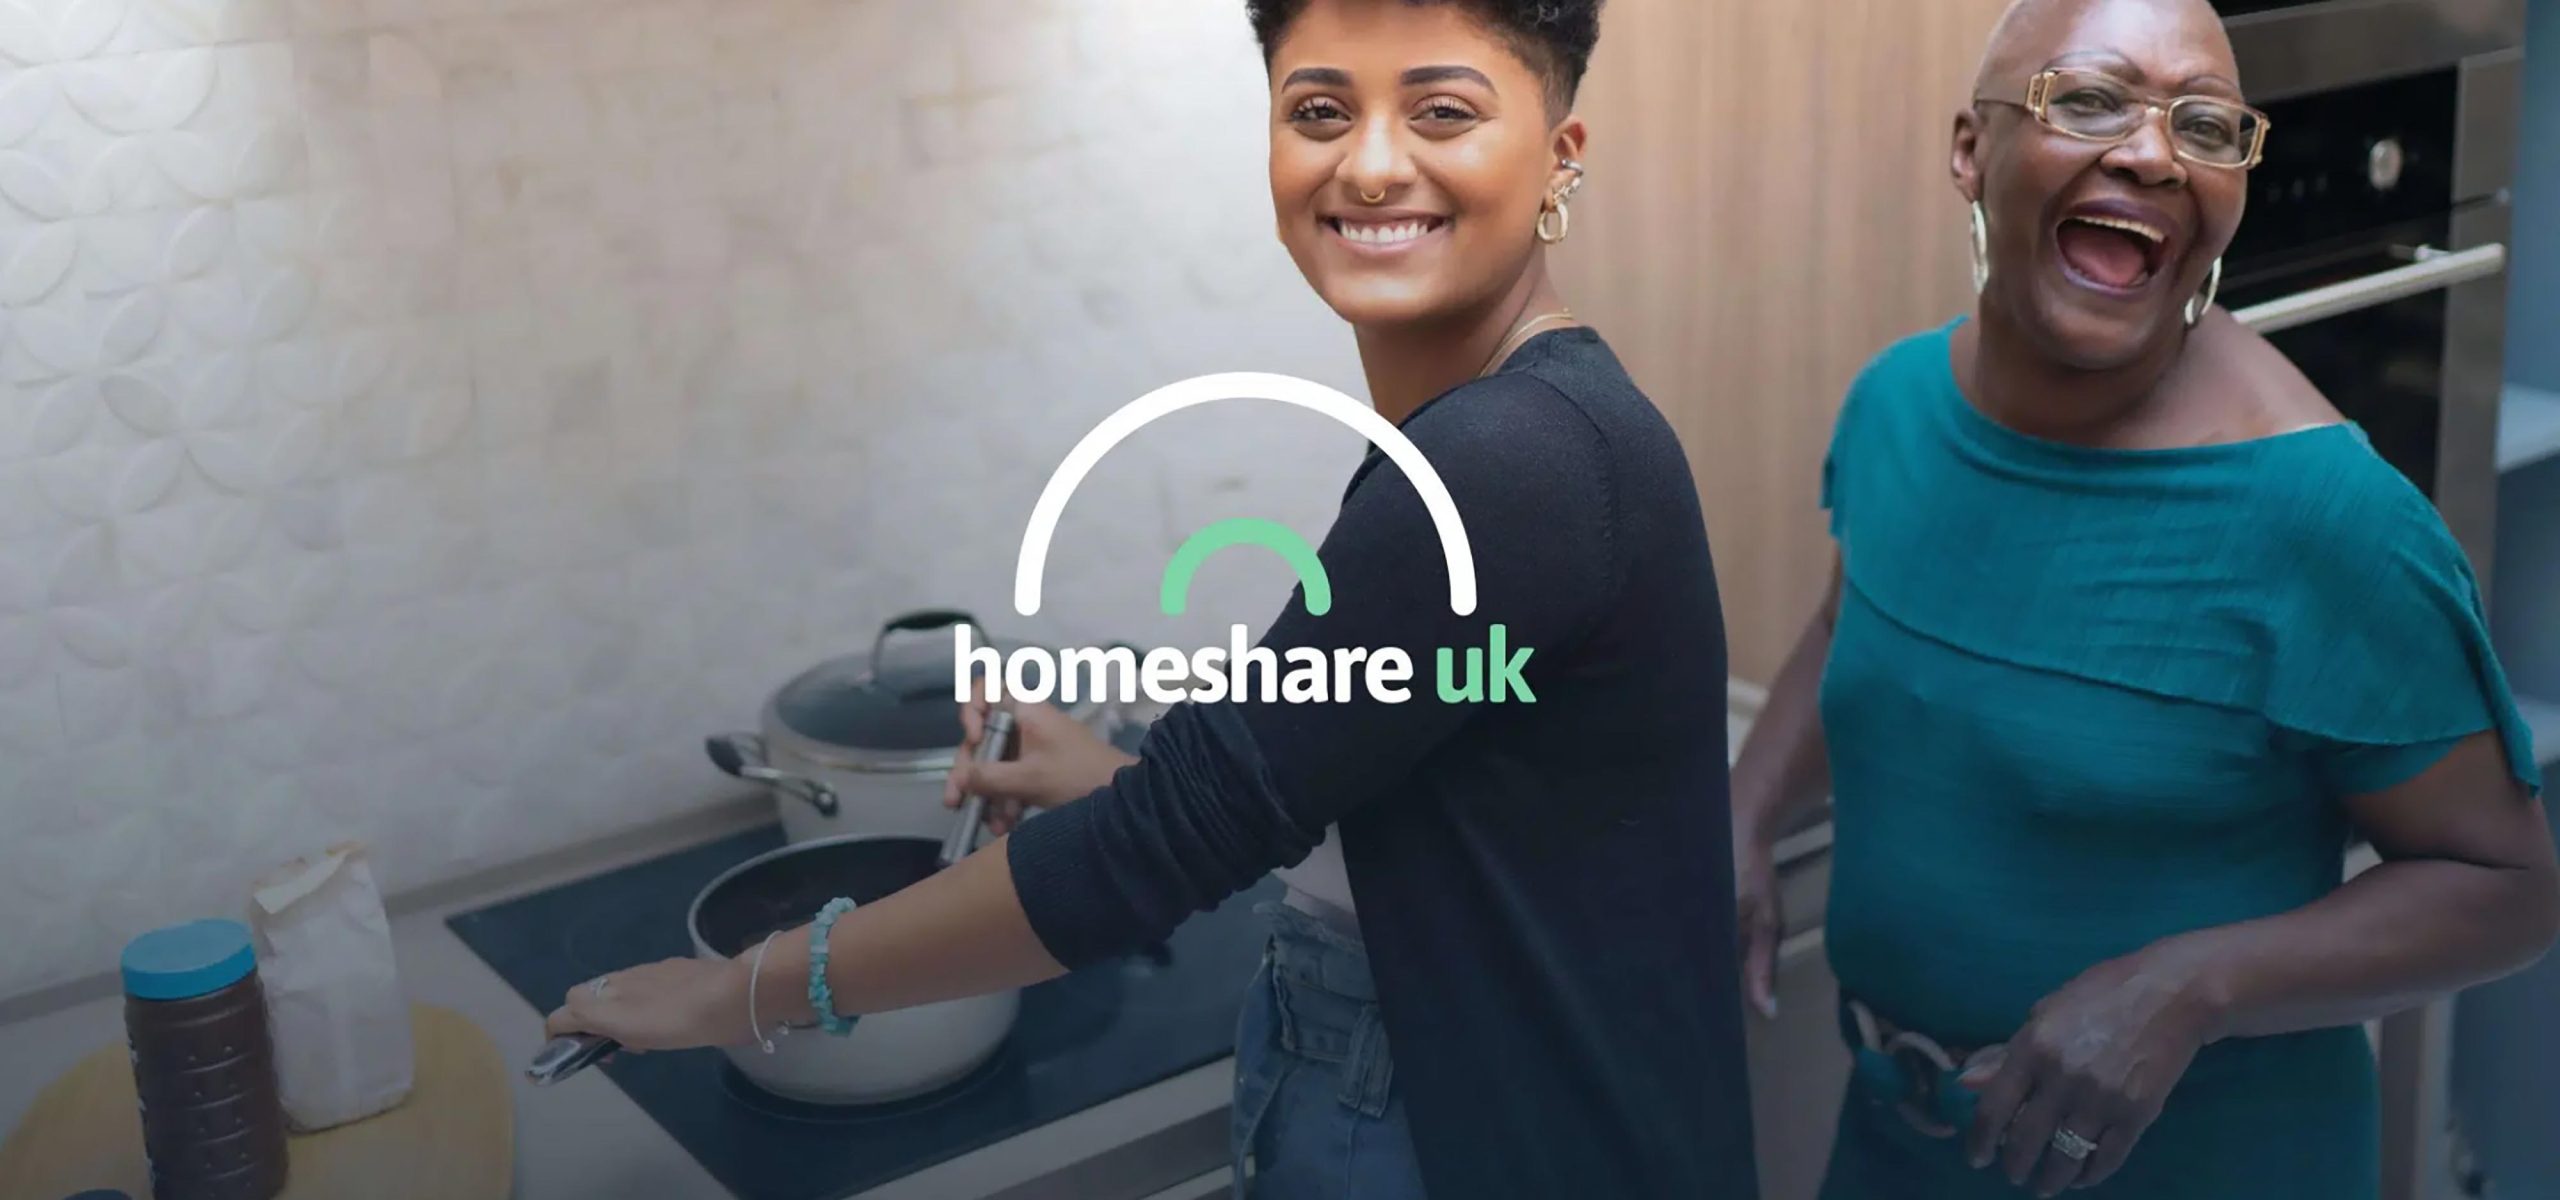 The hero image for Homeshare UK, a project of Liverpool based design agency, Hopeful Studio.